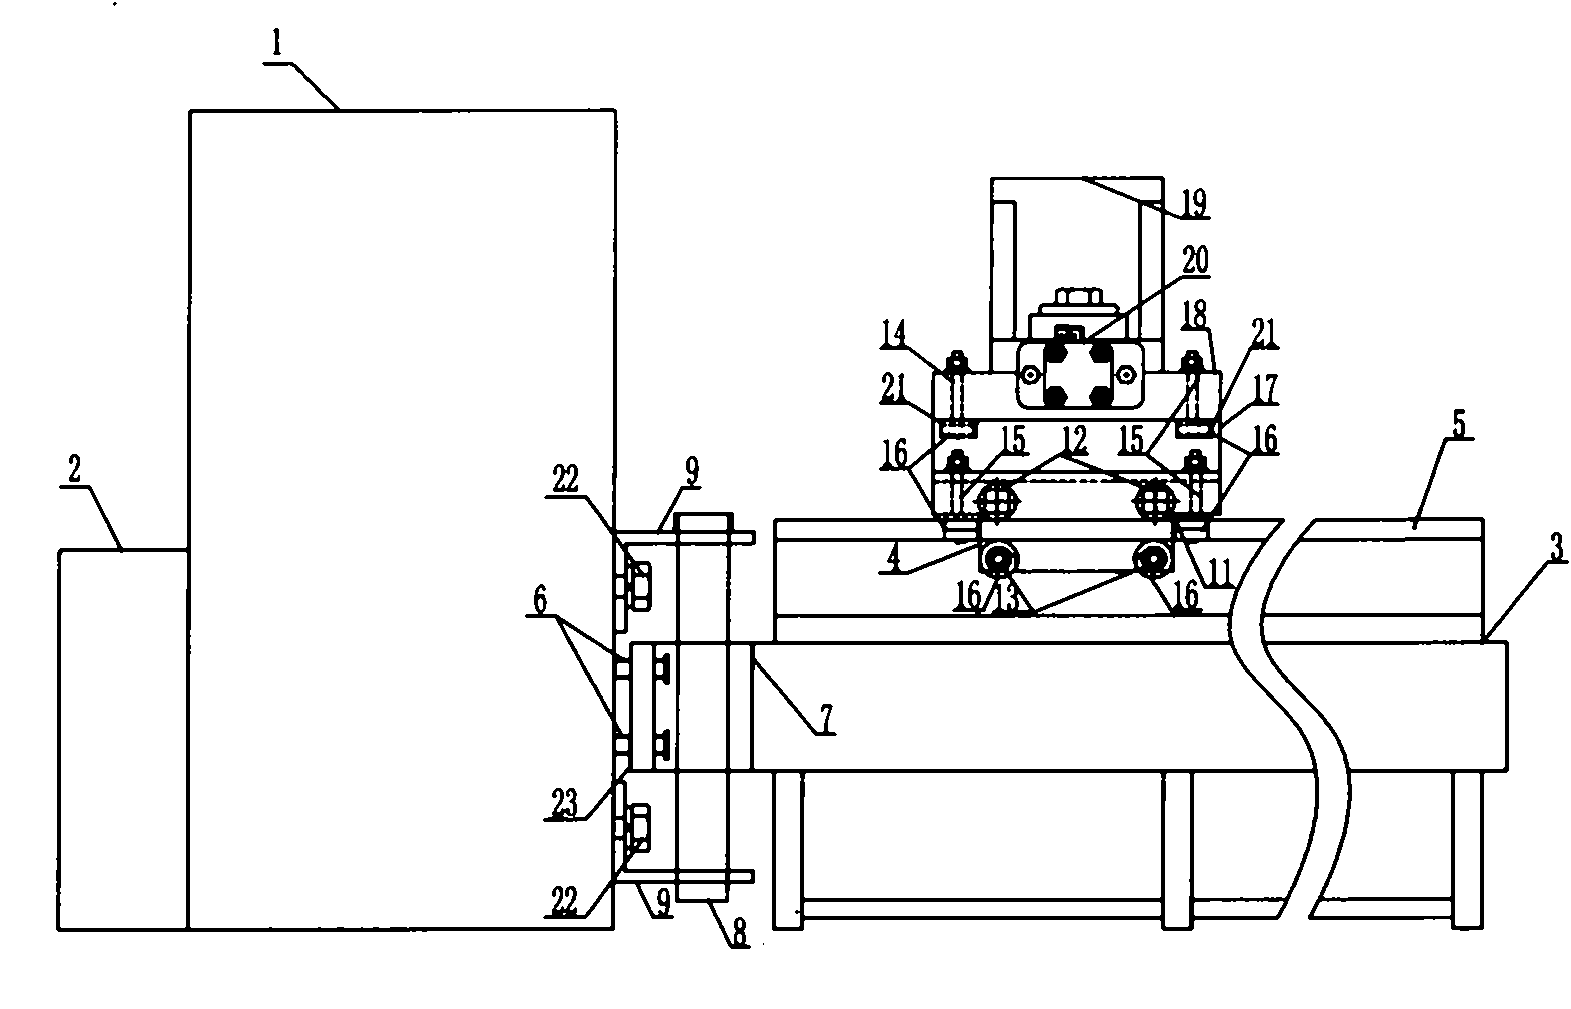 Fully-automatic metal band sawing machine